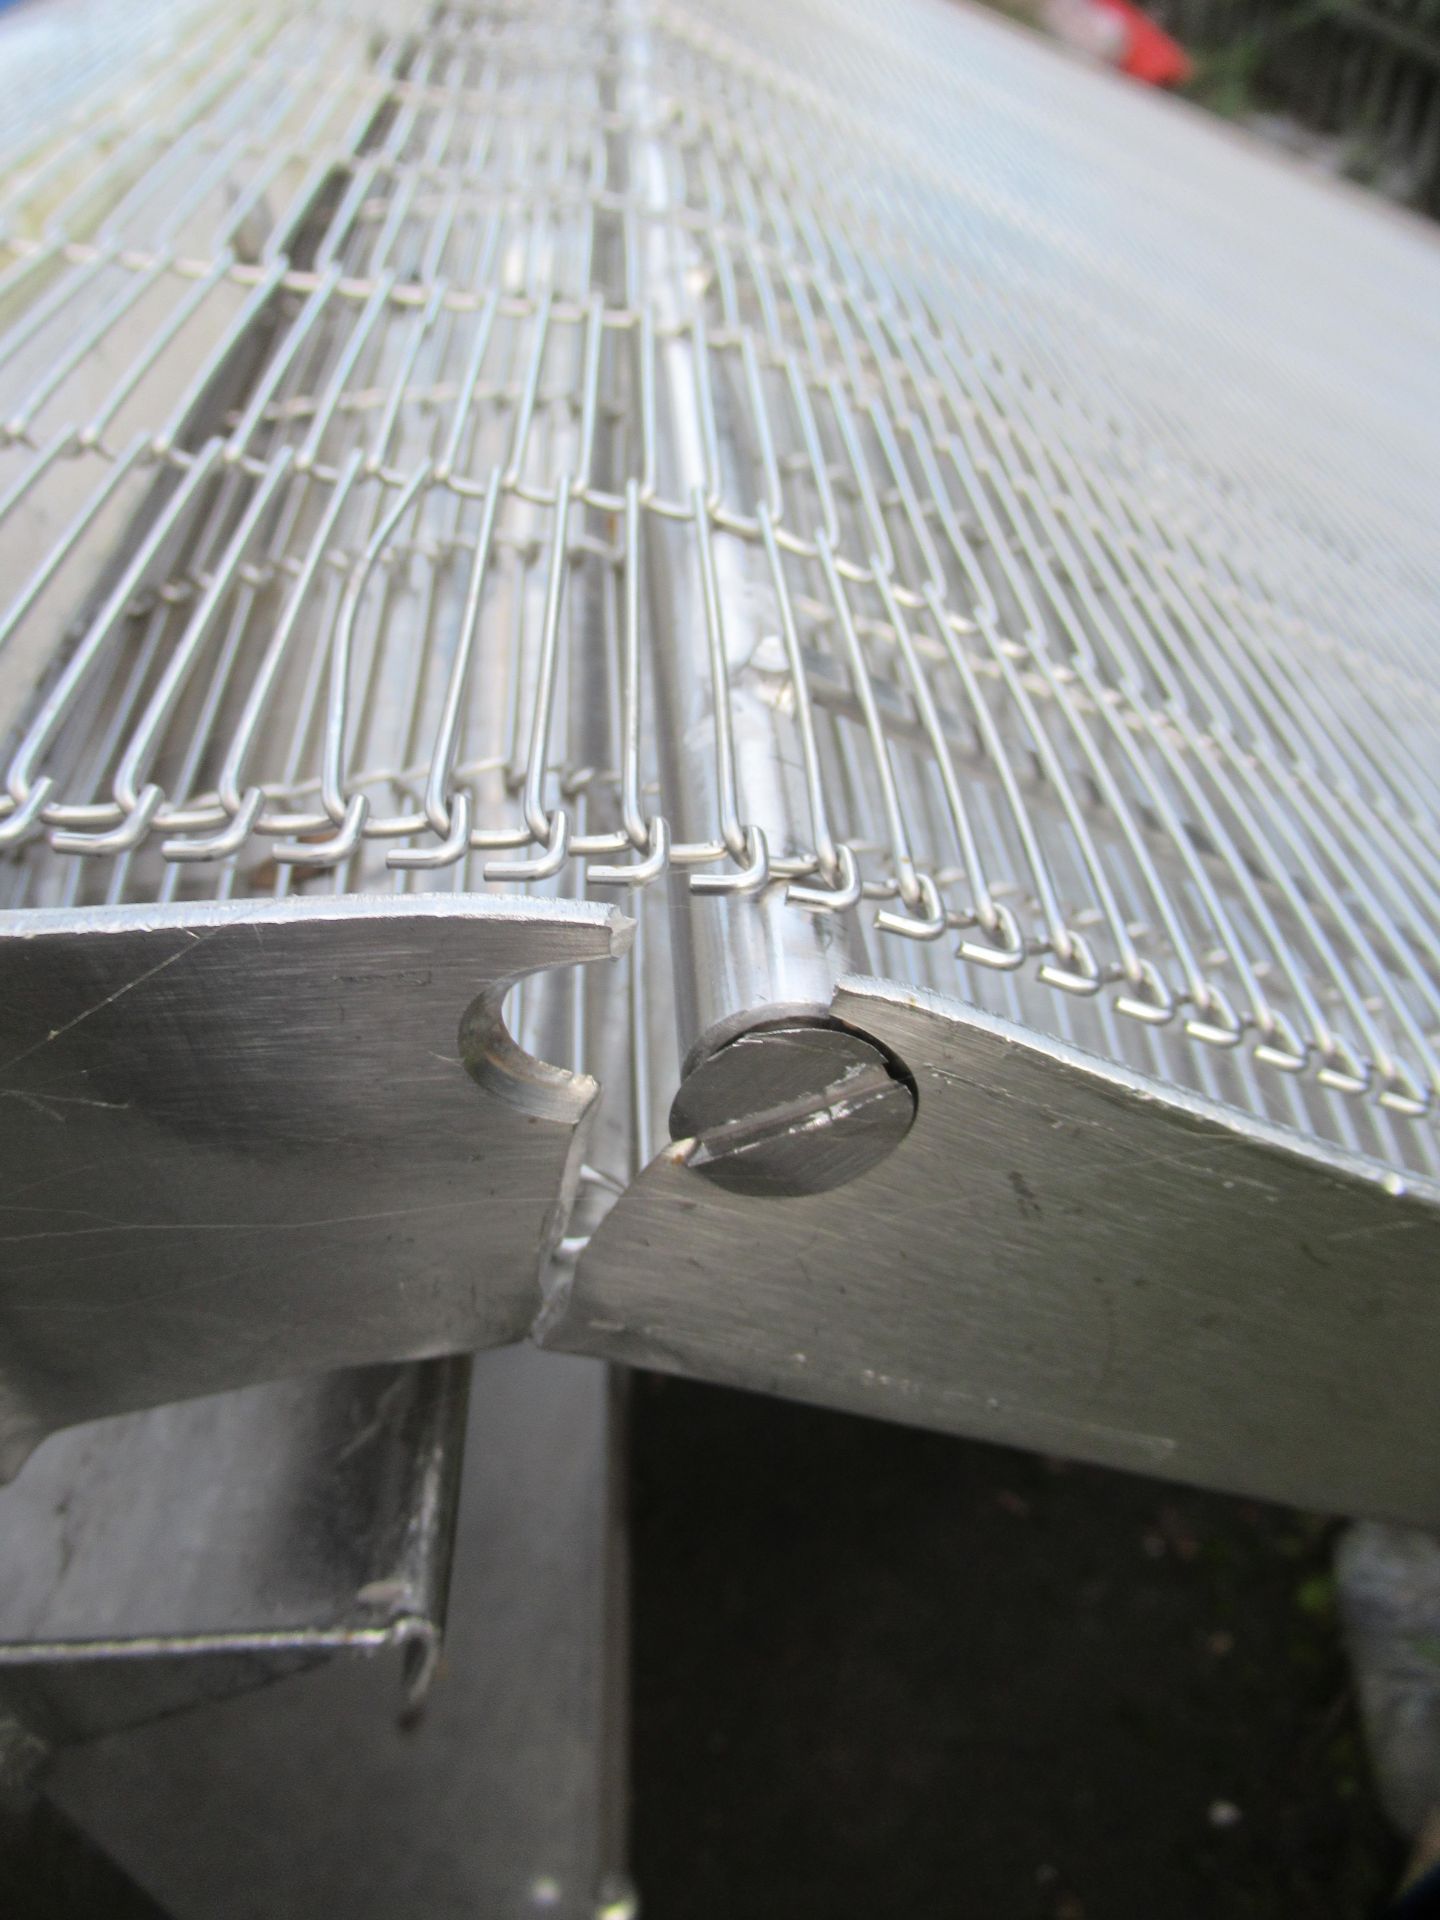 Commercial Catering Stainless Steel Convayor Unit - Image 2 of 3